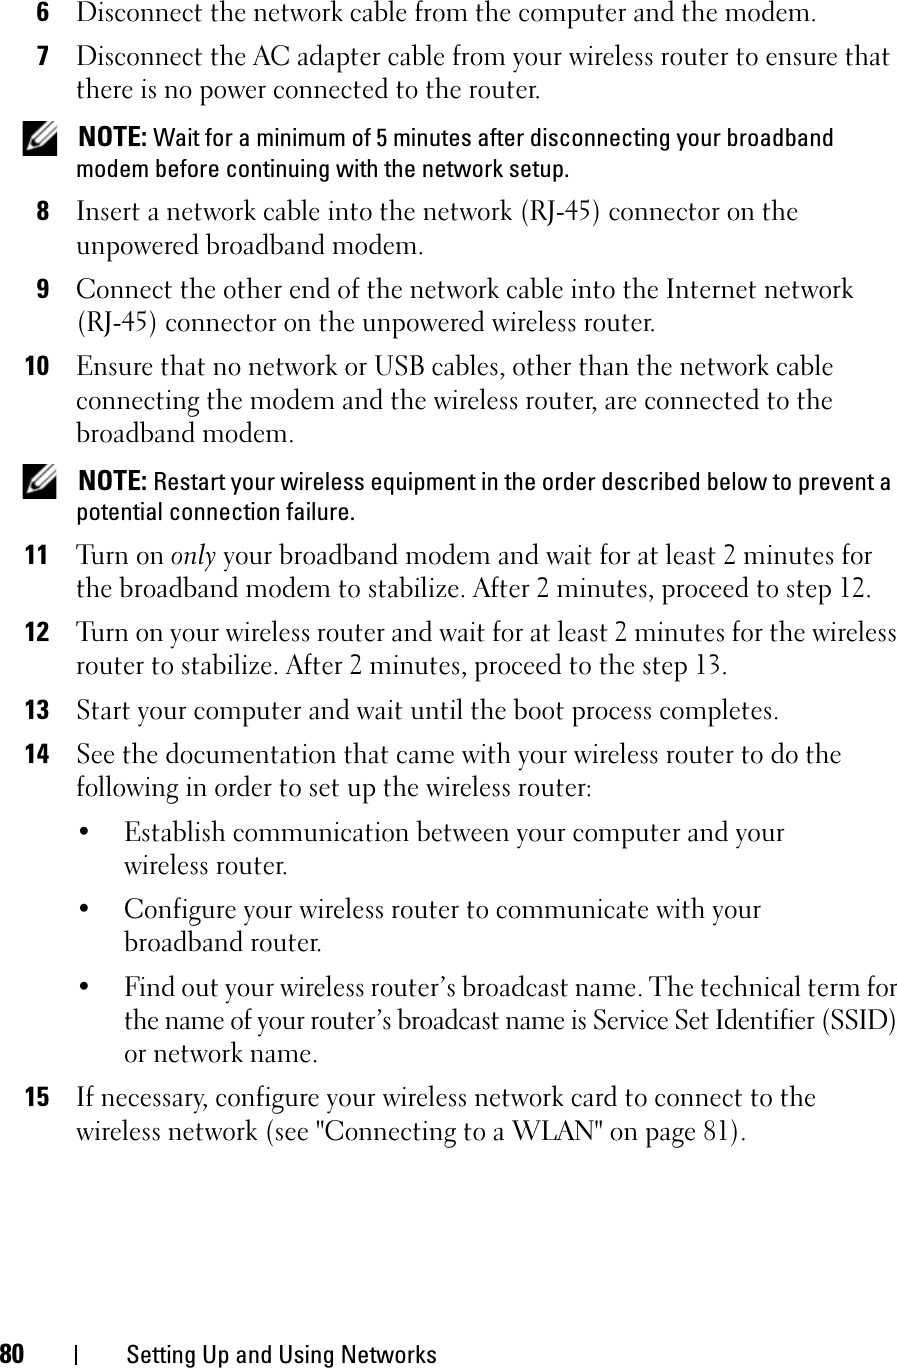 80 Setting Up and Using Networks6Disconnect the network cable from the computer and the modem.7Disconnect the AC adapter cable from your wireless router to ensure that there is no power connected to the router.NOTE: Wait for a minimum of 5 minutes after disconnecting your broadband modem before continuing with the network setup.8Insert a network cable into the network (RJ-45) connector on the unpowered broadband modem.9Connect the other end of the network cable into the Internet network (RJ-45) connector on the unpowered wireless router.10Ensure that no network or USB cables, other than the network cable connecting the modem and the wireless router, are connected to the broadband modem.NOTE: Restart your wireless equipment in the order described below to prevent a potential connection failure.11Turn on only your broadband modem and wait for at least 2 minutes for the broadband modem to stabilize. After 2 minutes, proceed to step 12.12Turn on your wireless router and wait for at least 2 minutes for the wireless router to stabilize. After 2 minutes, proceed to the step 13.13Start your computer and wait until the boot process completes.14See the documentation that came with your wireless router to do the following in order to set up the wireless router:• Establish communication between your computer and your wireless router.• Configure your wireless router to communicate with your broadband router.• Find out your wireless router’s broadcast name. The technical term for the name of your router’s broadcast name is Service Set Identifier (SSID) or network name.15If necessary, configure your wireless network card to connect to the wireless network (see &quot;Connecting to a WLAN&quot; on page 81).